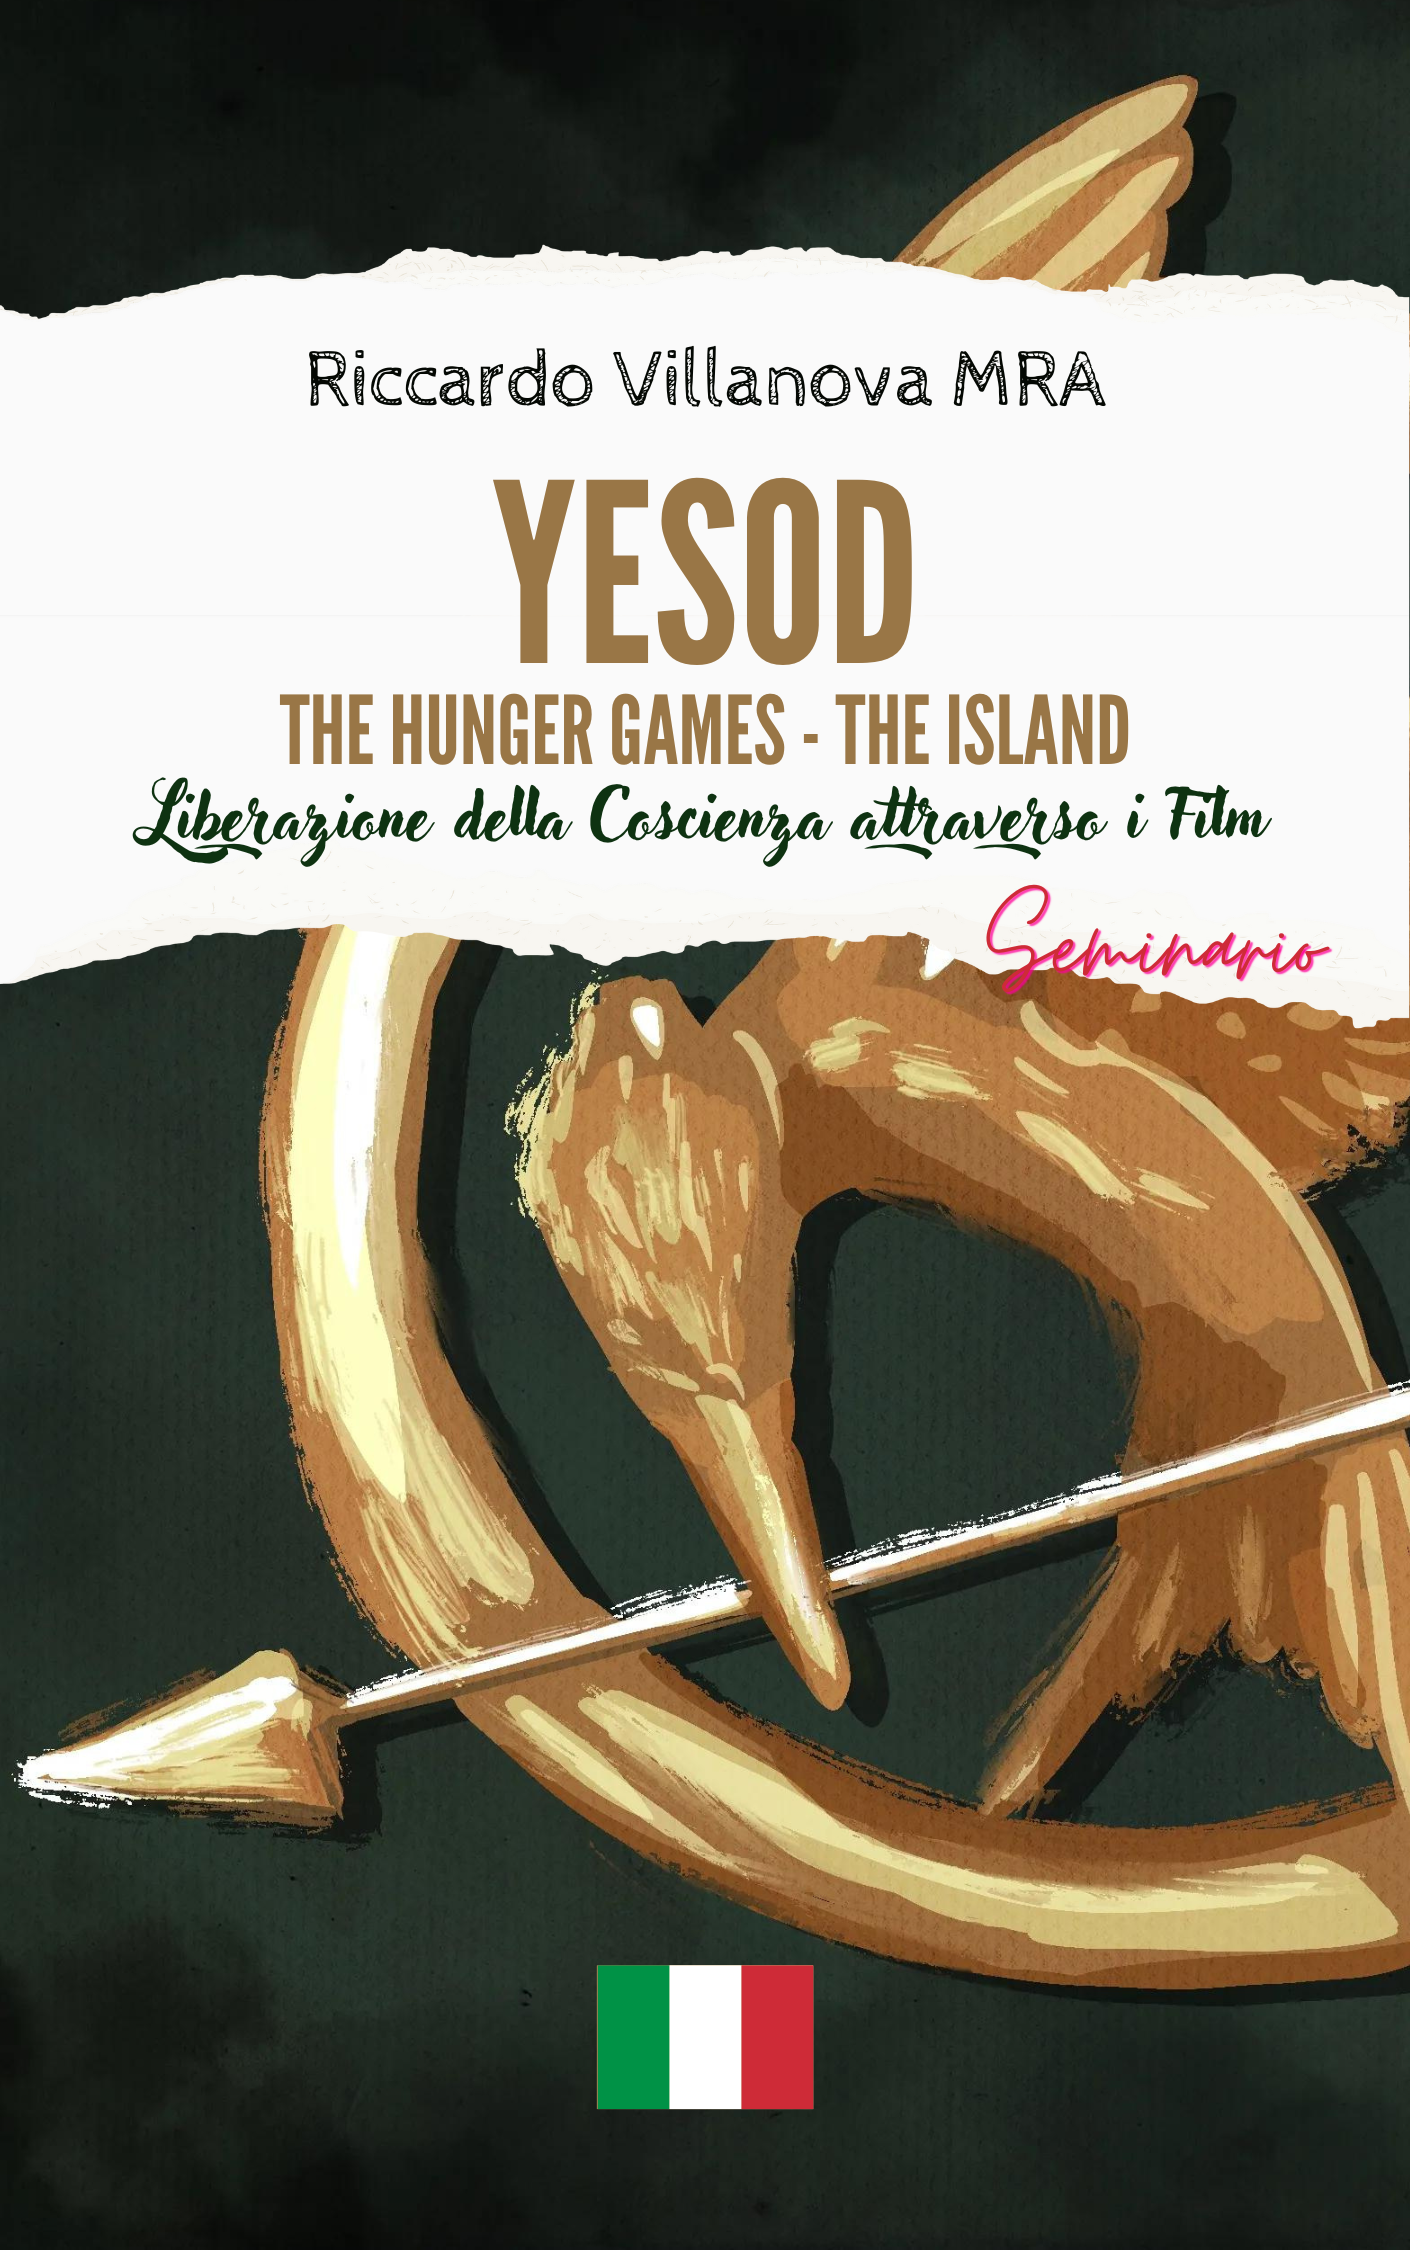 2. YESOD: LIBERATION OF CONSCIOUSNESS THROUGH FILM